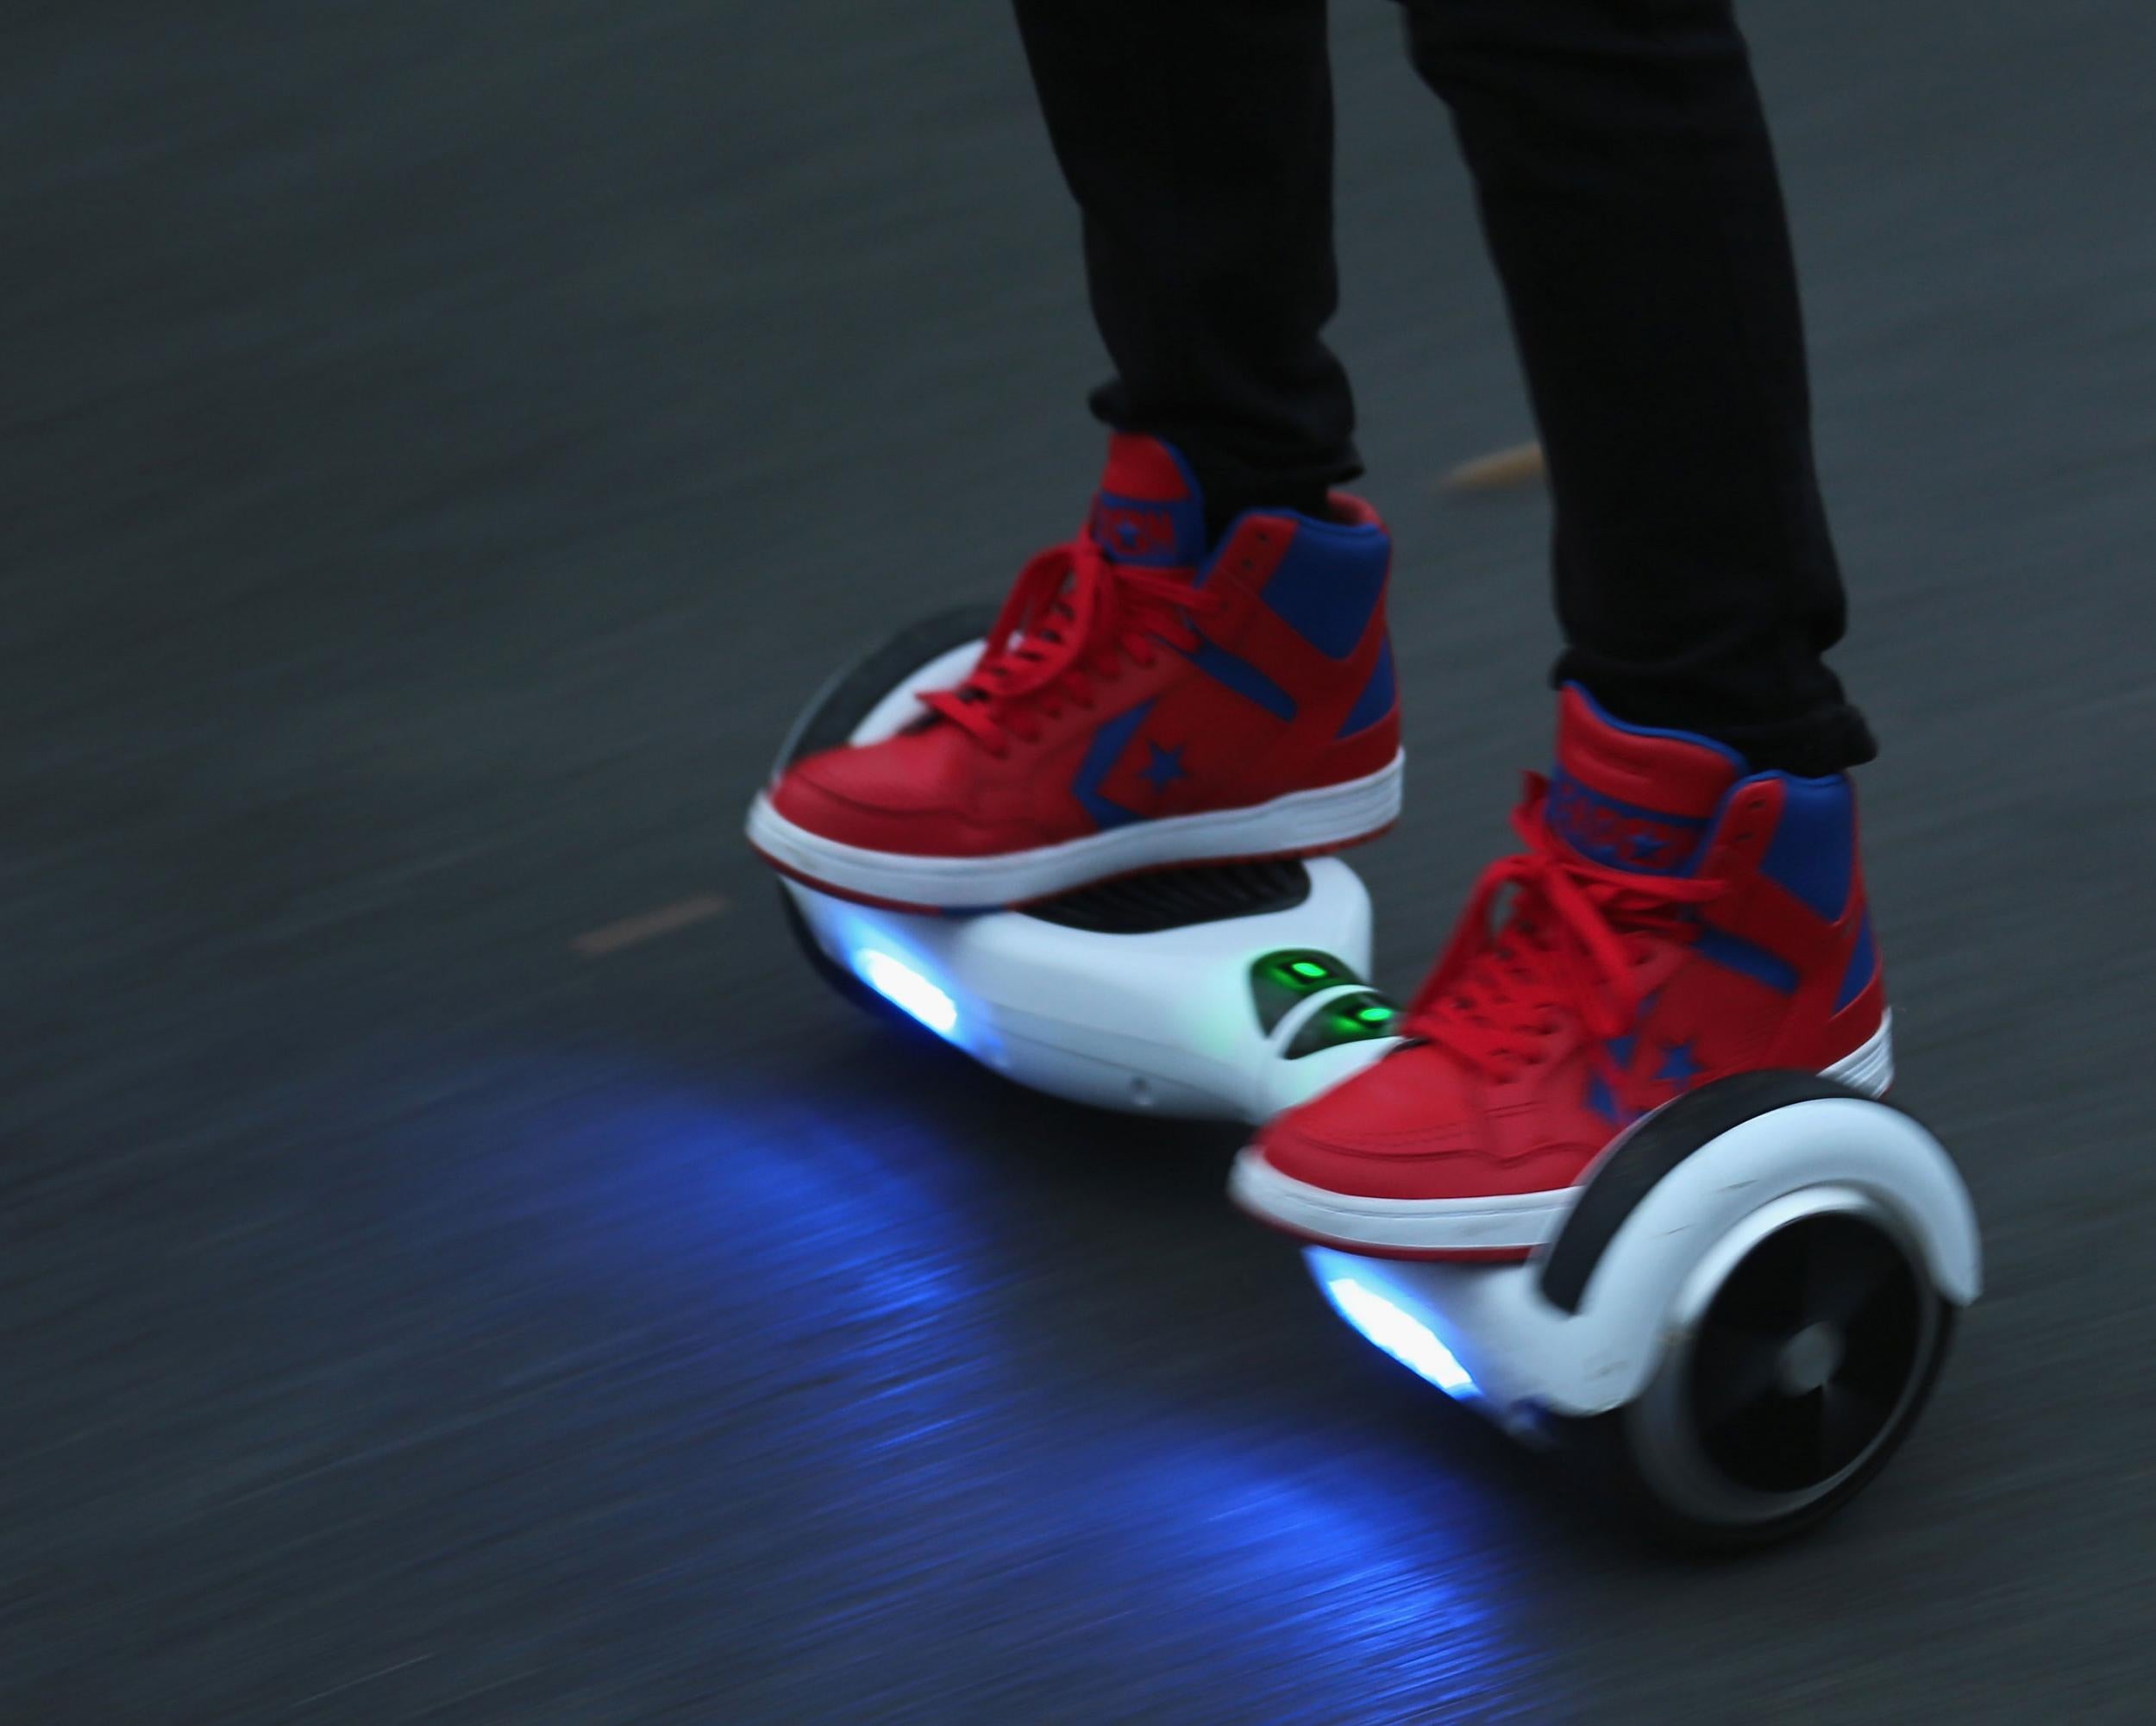 The British Crown Prosecution Service declared hoverboards illegal as they are are too unsafe to ride on the road